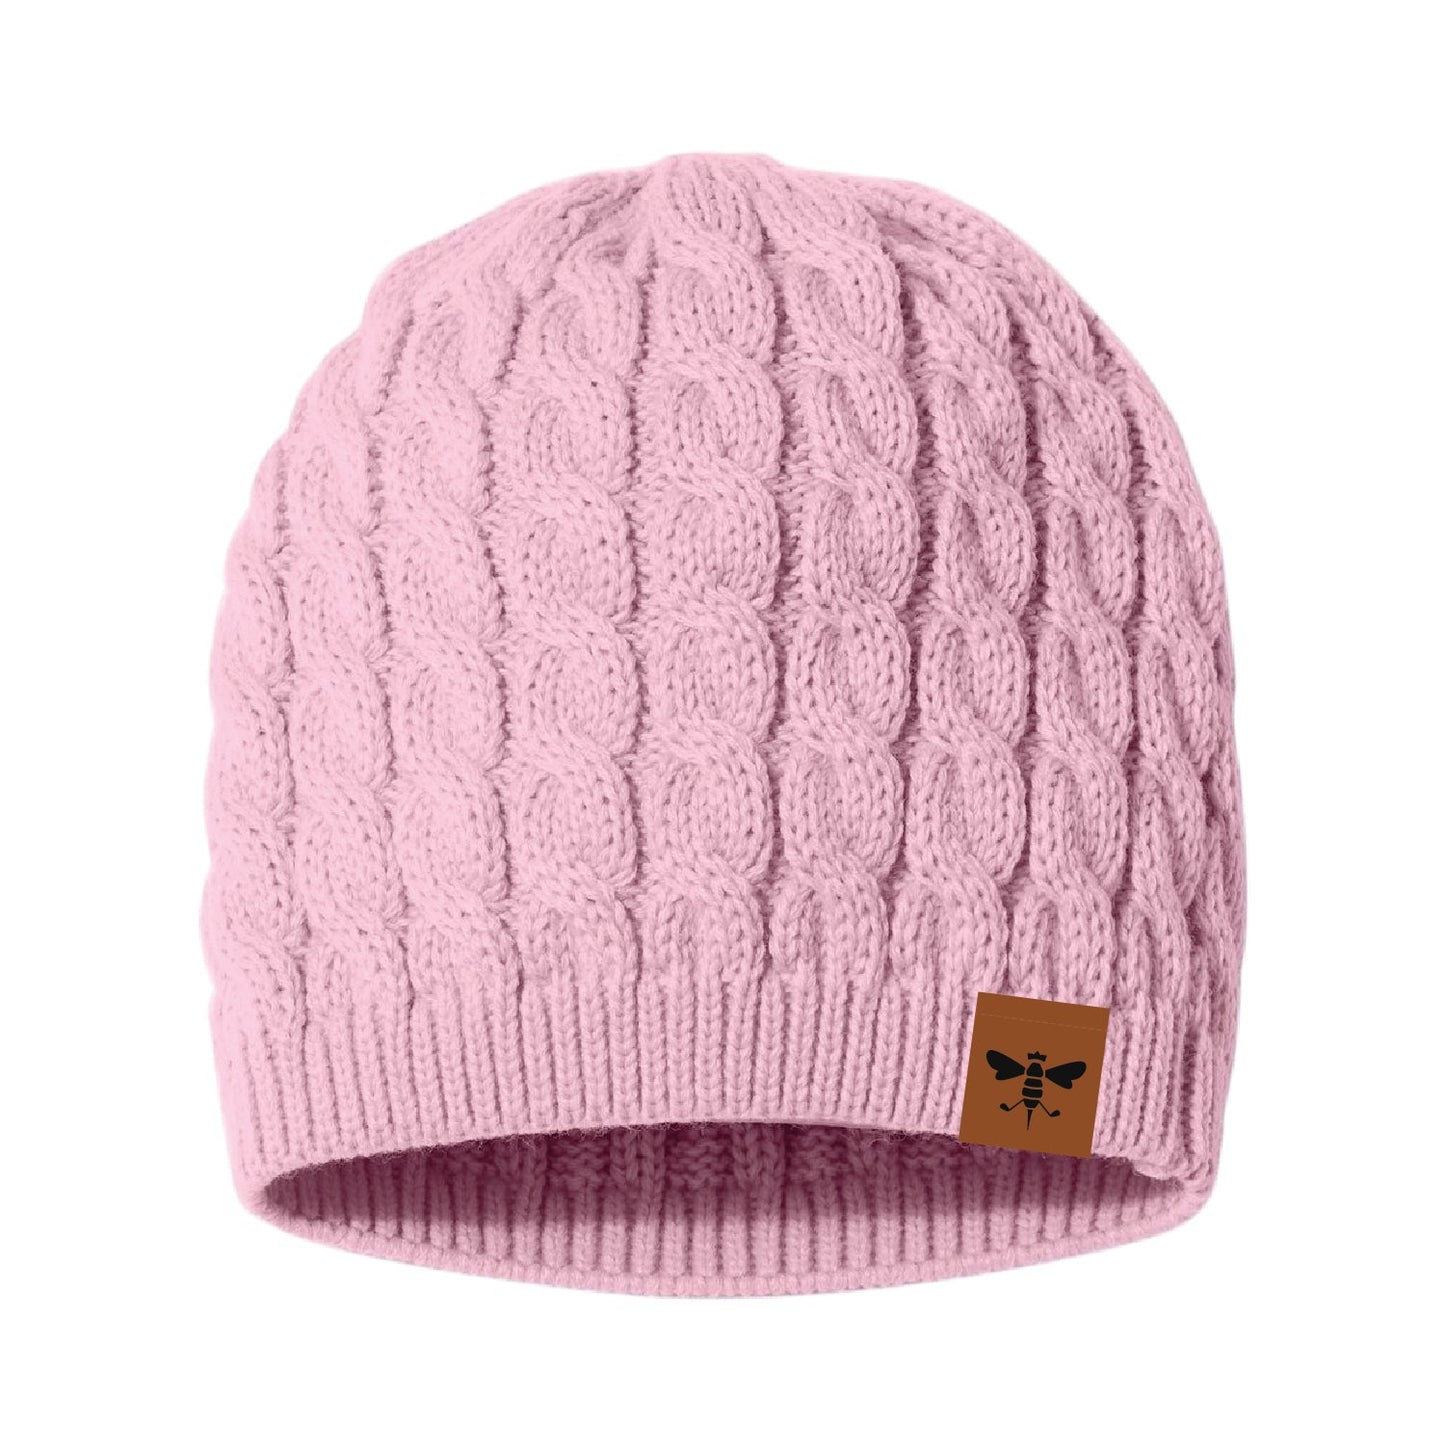 Queen B's Cable Knit Beanie - DSP On Demand